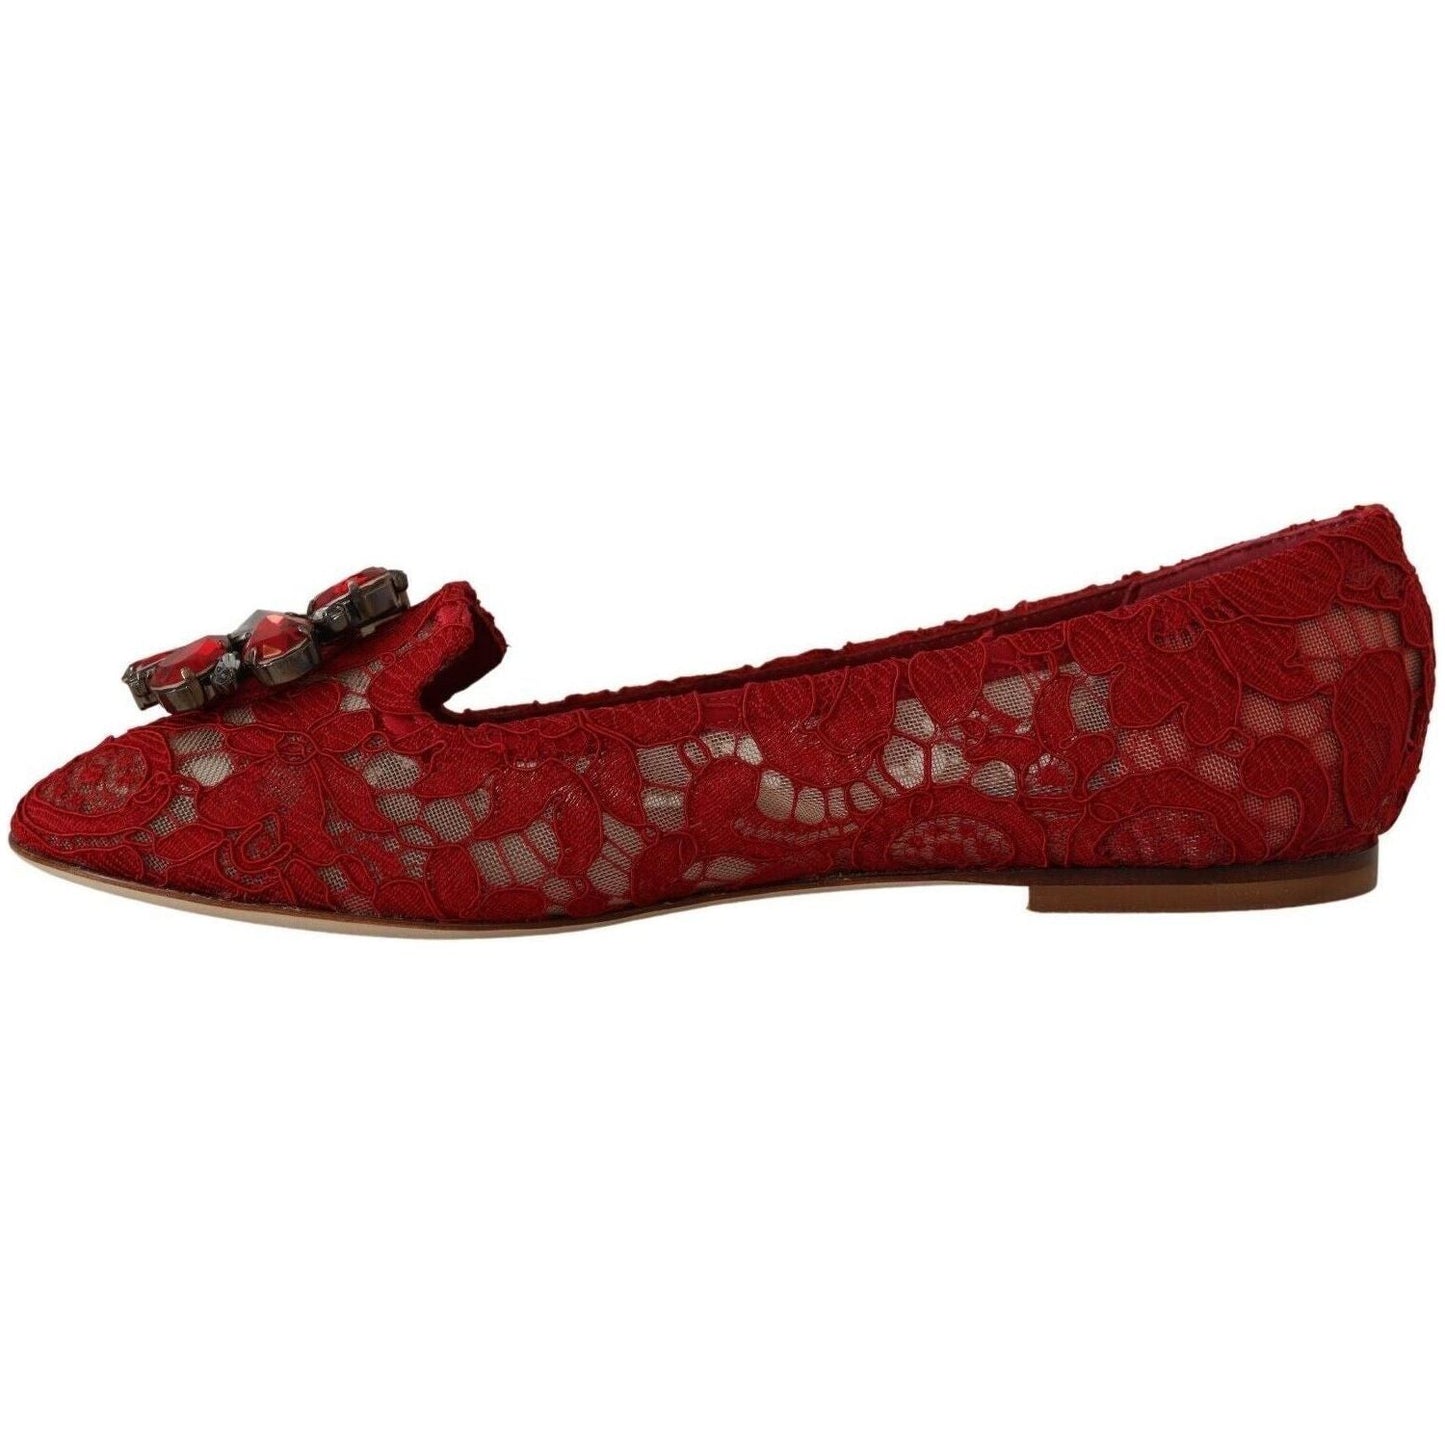 Dolce & Gabbana Radiant Red Lace Ballet Flats with Crystal Buckle red-lace-crystal-ballet-flats-loafers-shoes s-l1600-11-30-485fc3c7-52f.jpg